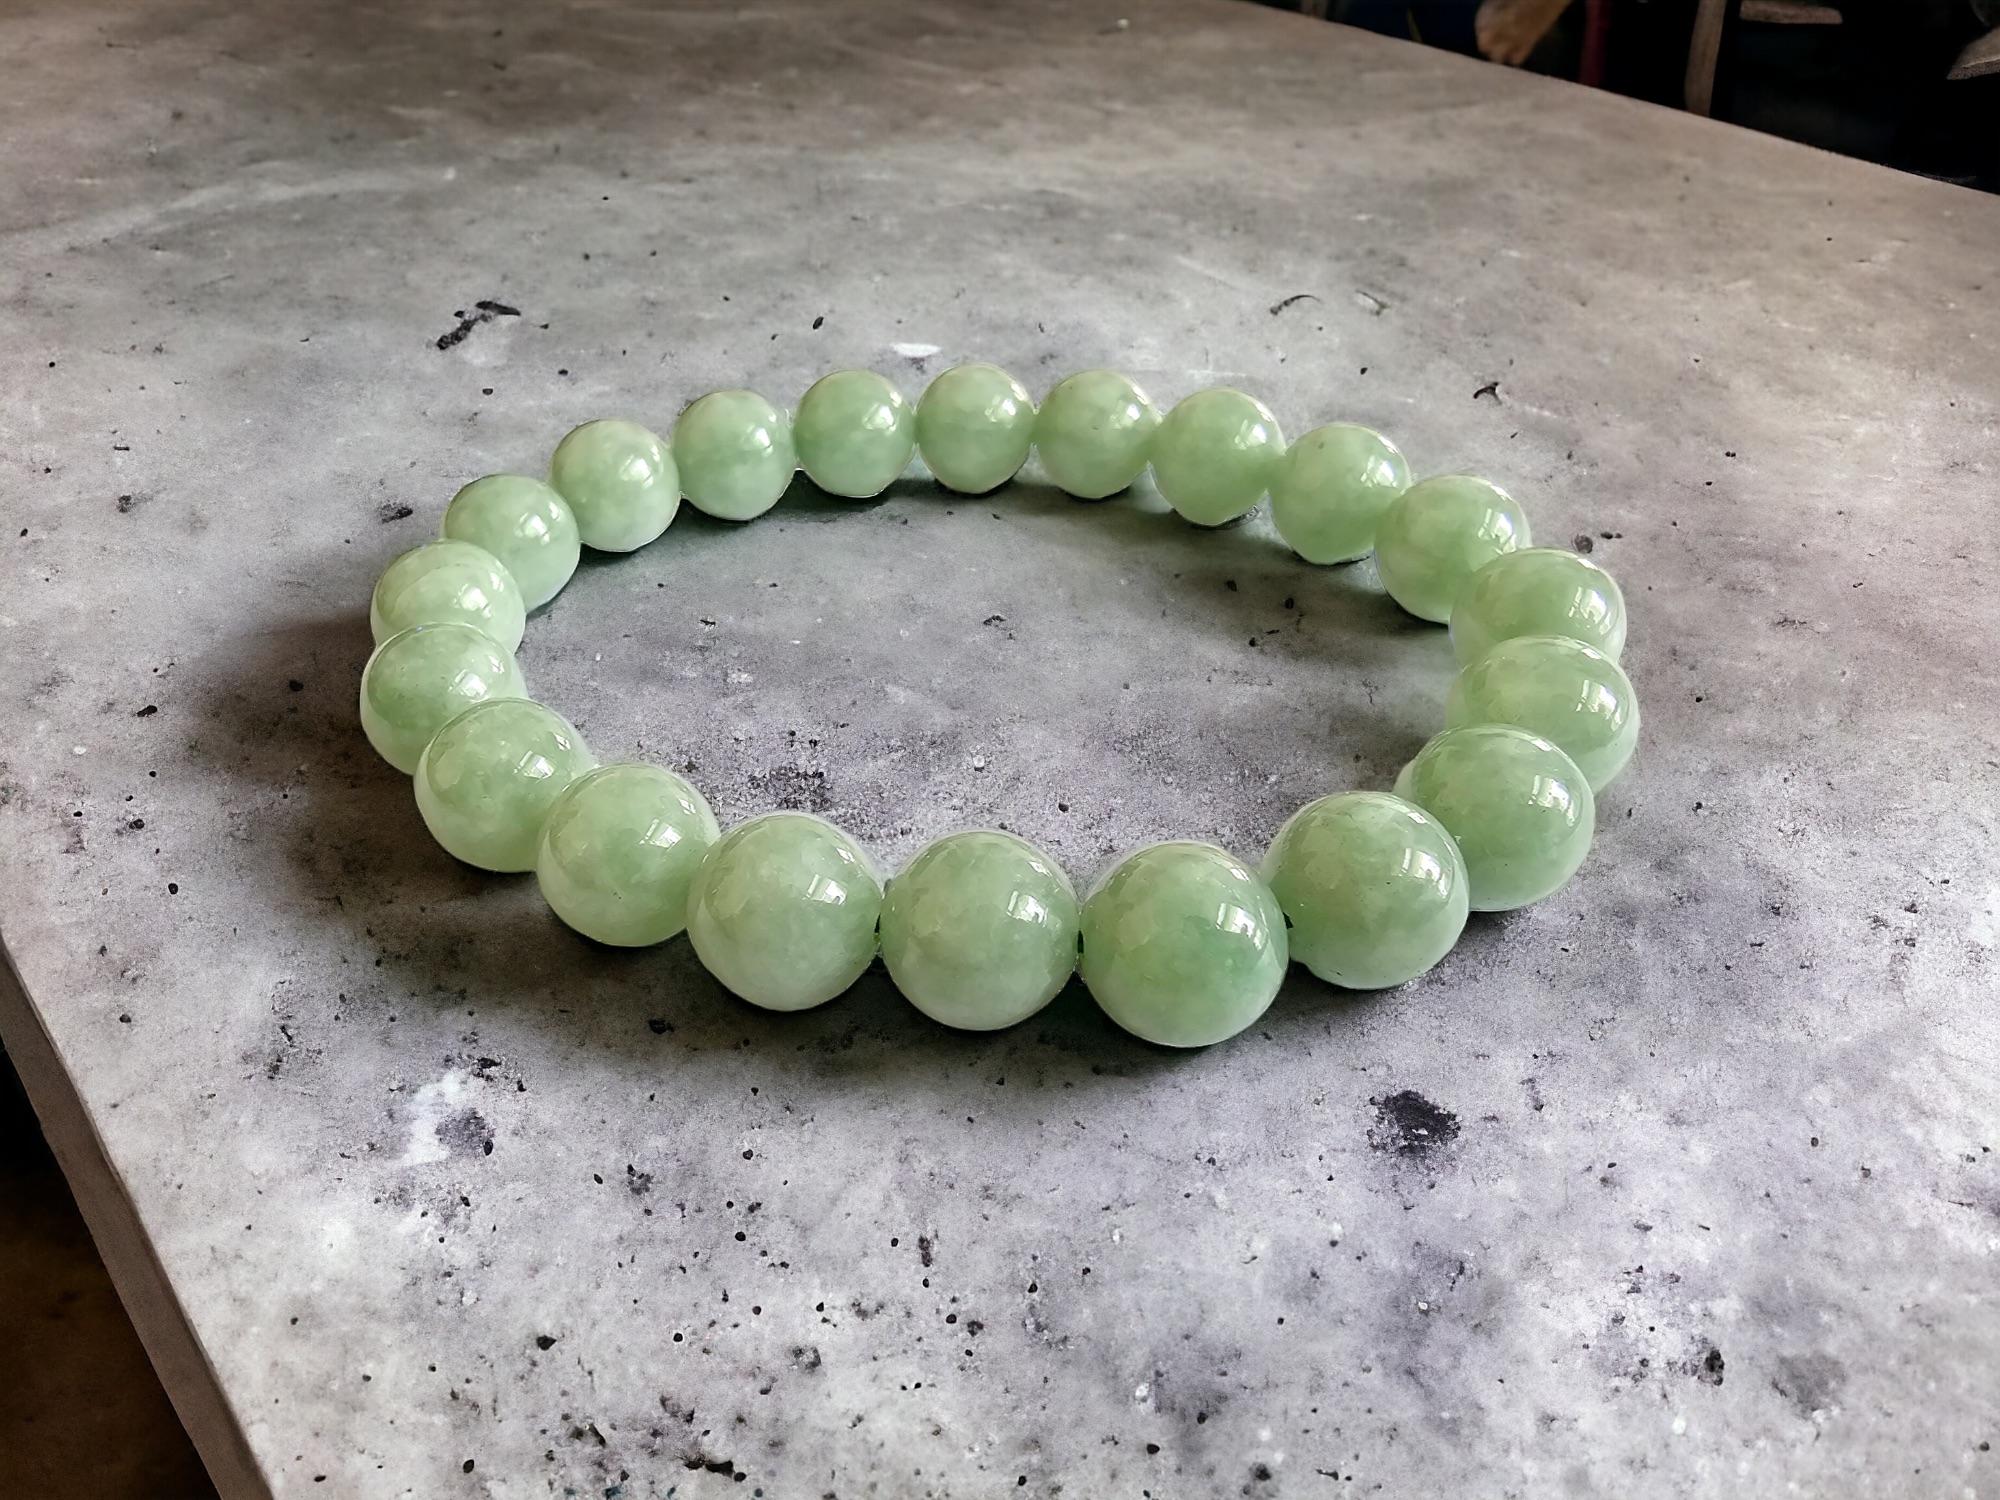 Imperial Green Burmese A-Jade Jadeite Beaded Bracelet (10mm Each x 20 beads) 05006

10mm each, 20 perfectly calibrated Green Jadeite Beads. Some of the rarest naturally occurring hues of A-Jadeite, calibrated Green creates a visually stunning